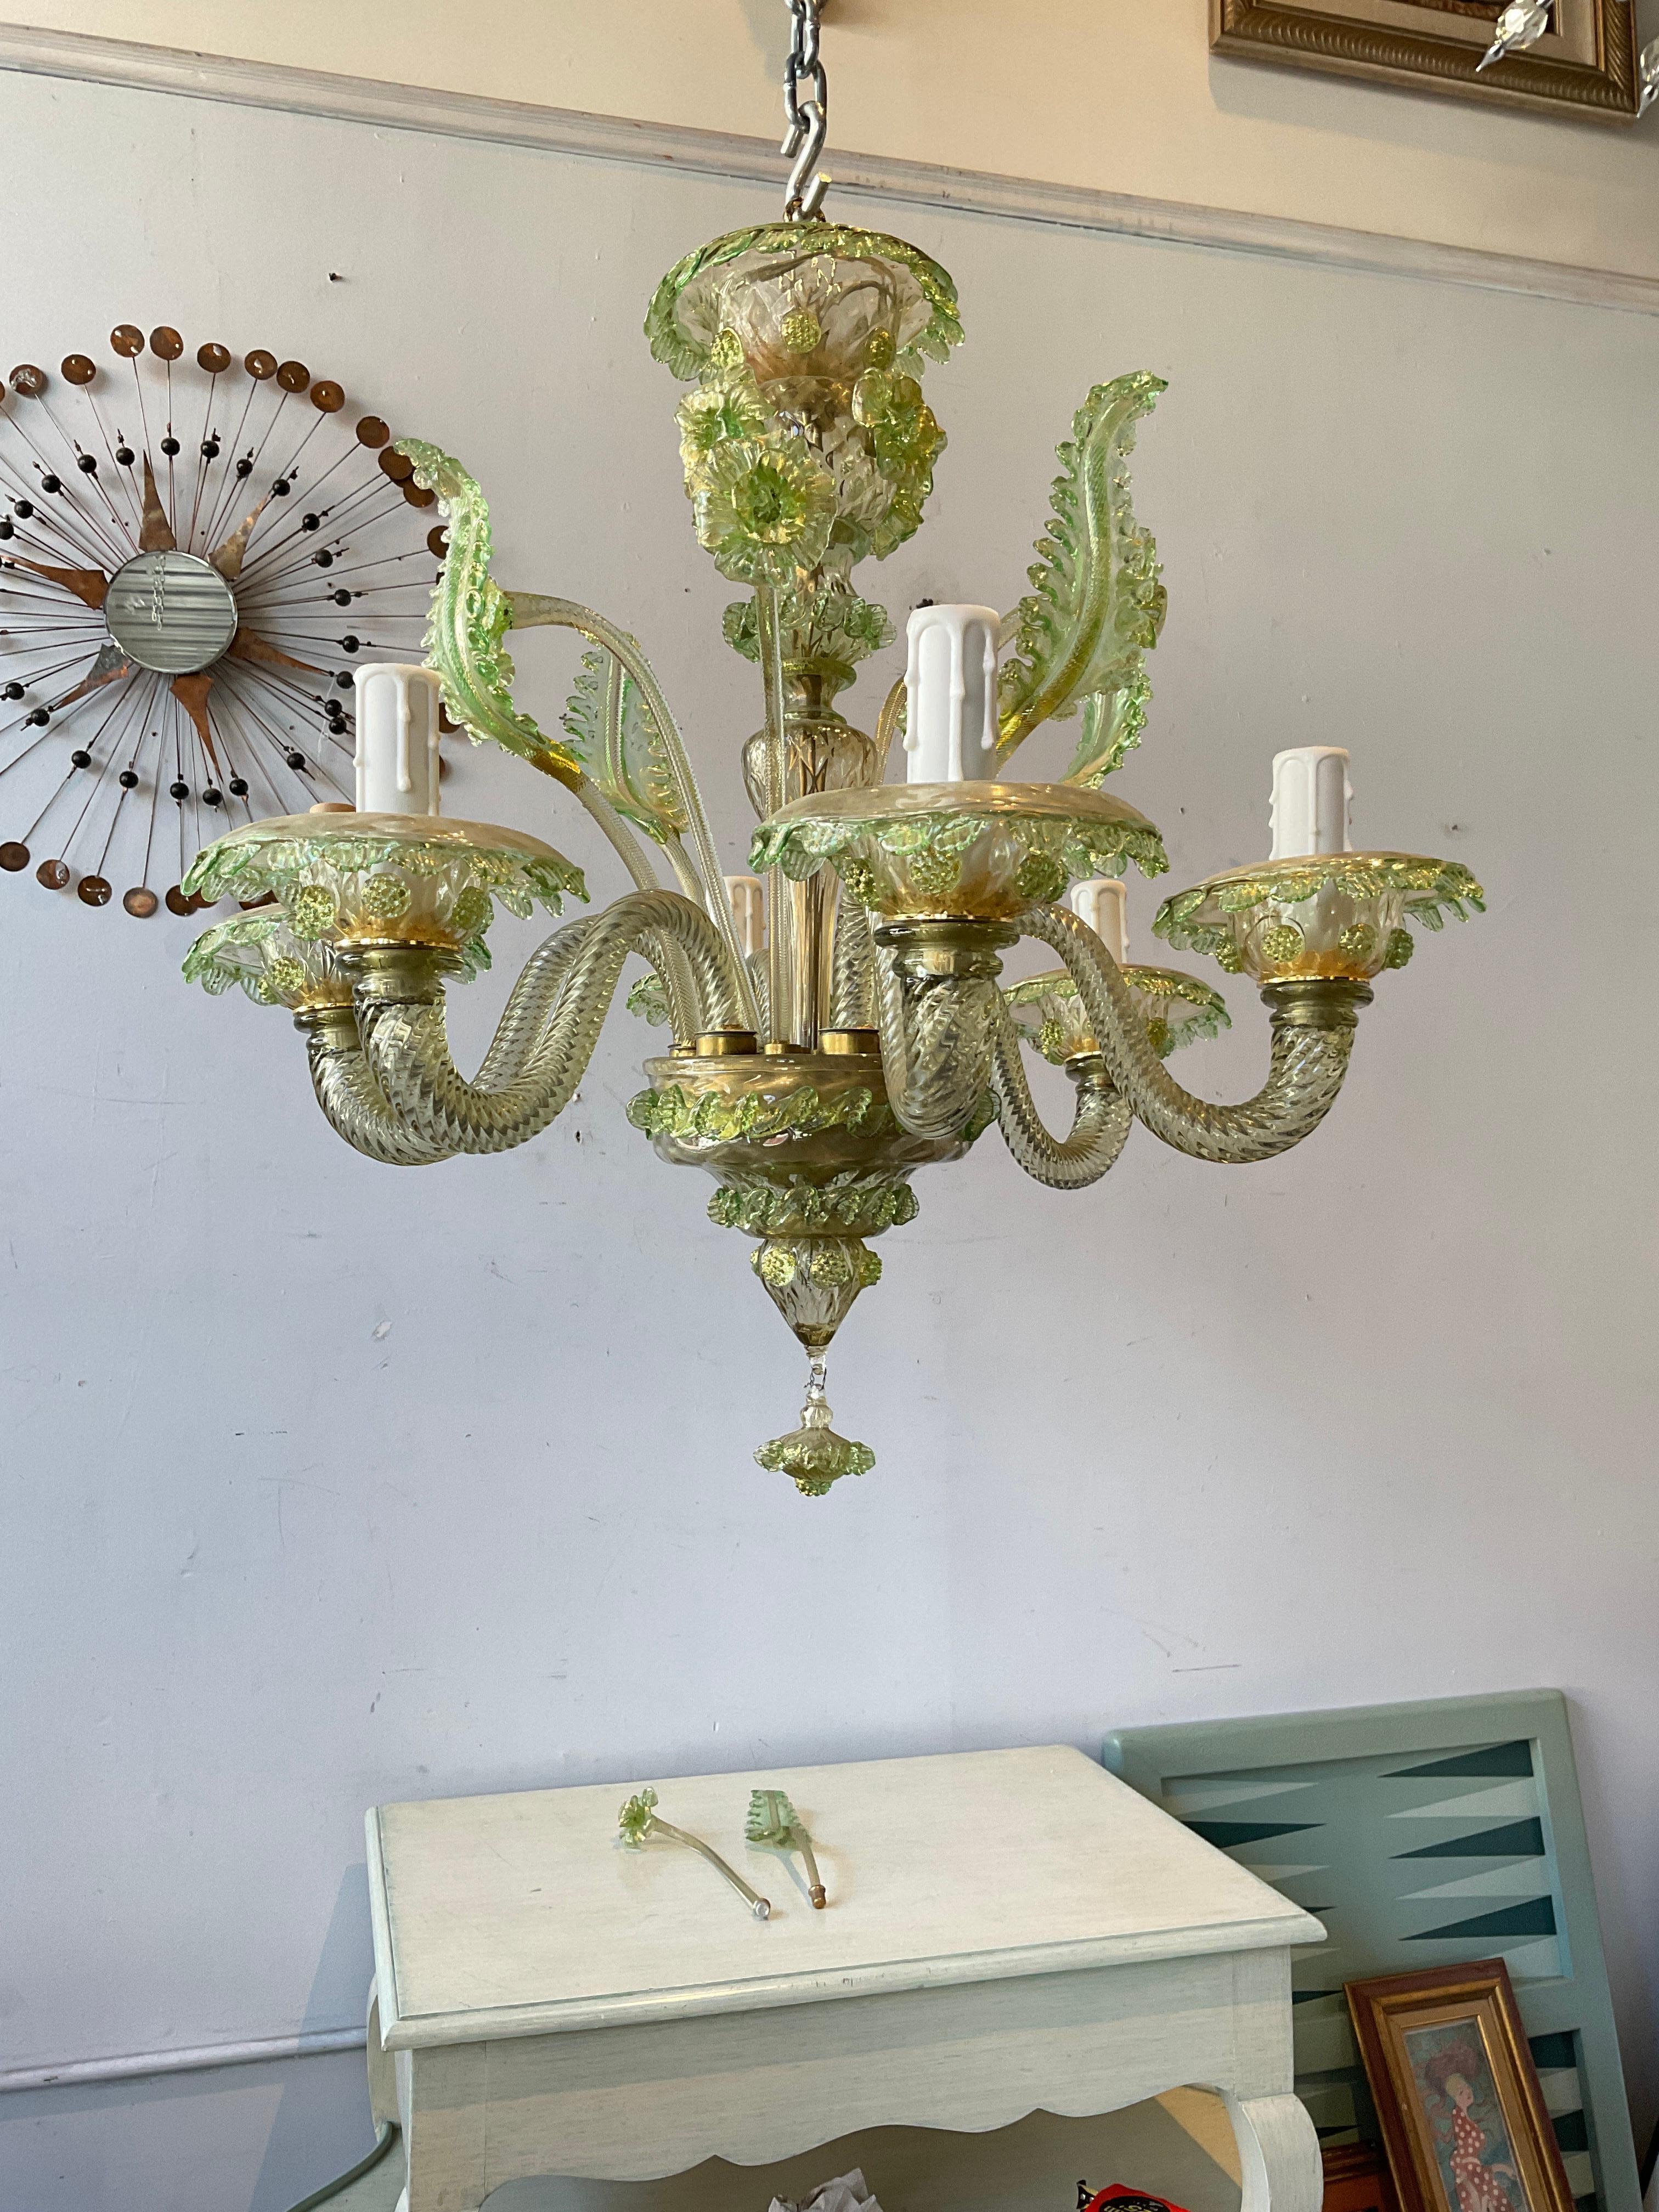 1950s Murano glass green chandelier. Originally this chandelier had more stems. Some are missing so it’s now evened out. There are 2 extras.
Chandelier was wired about 10 years ago, needs rewiring.